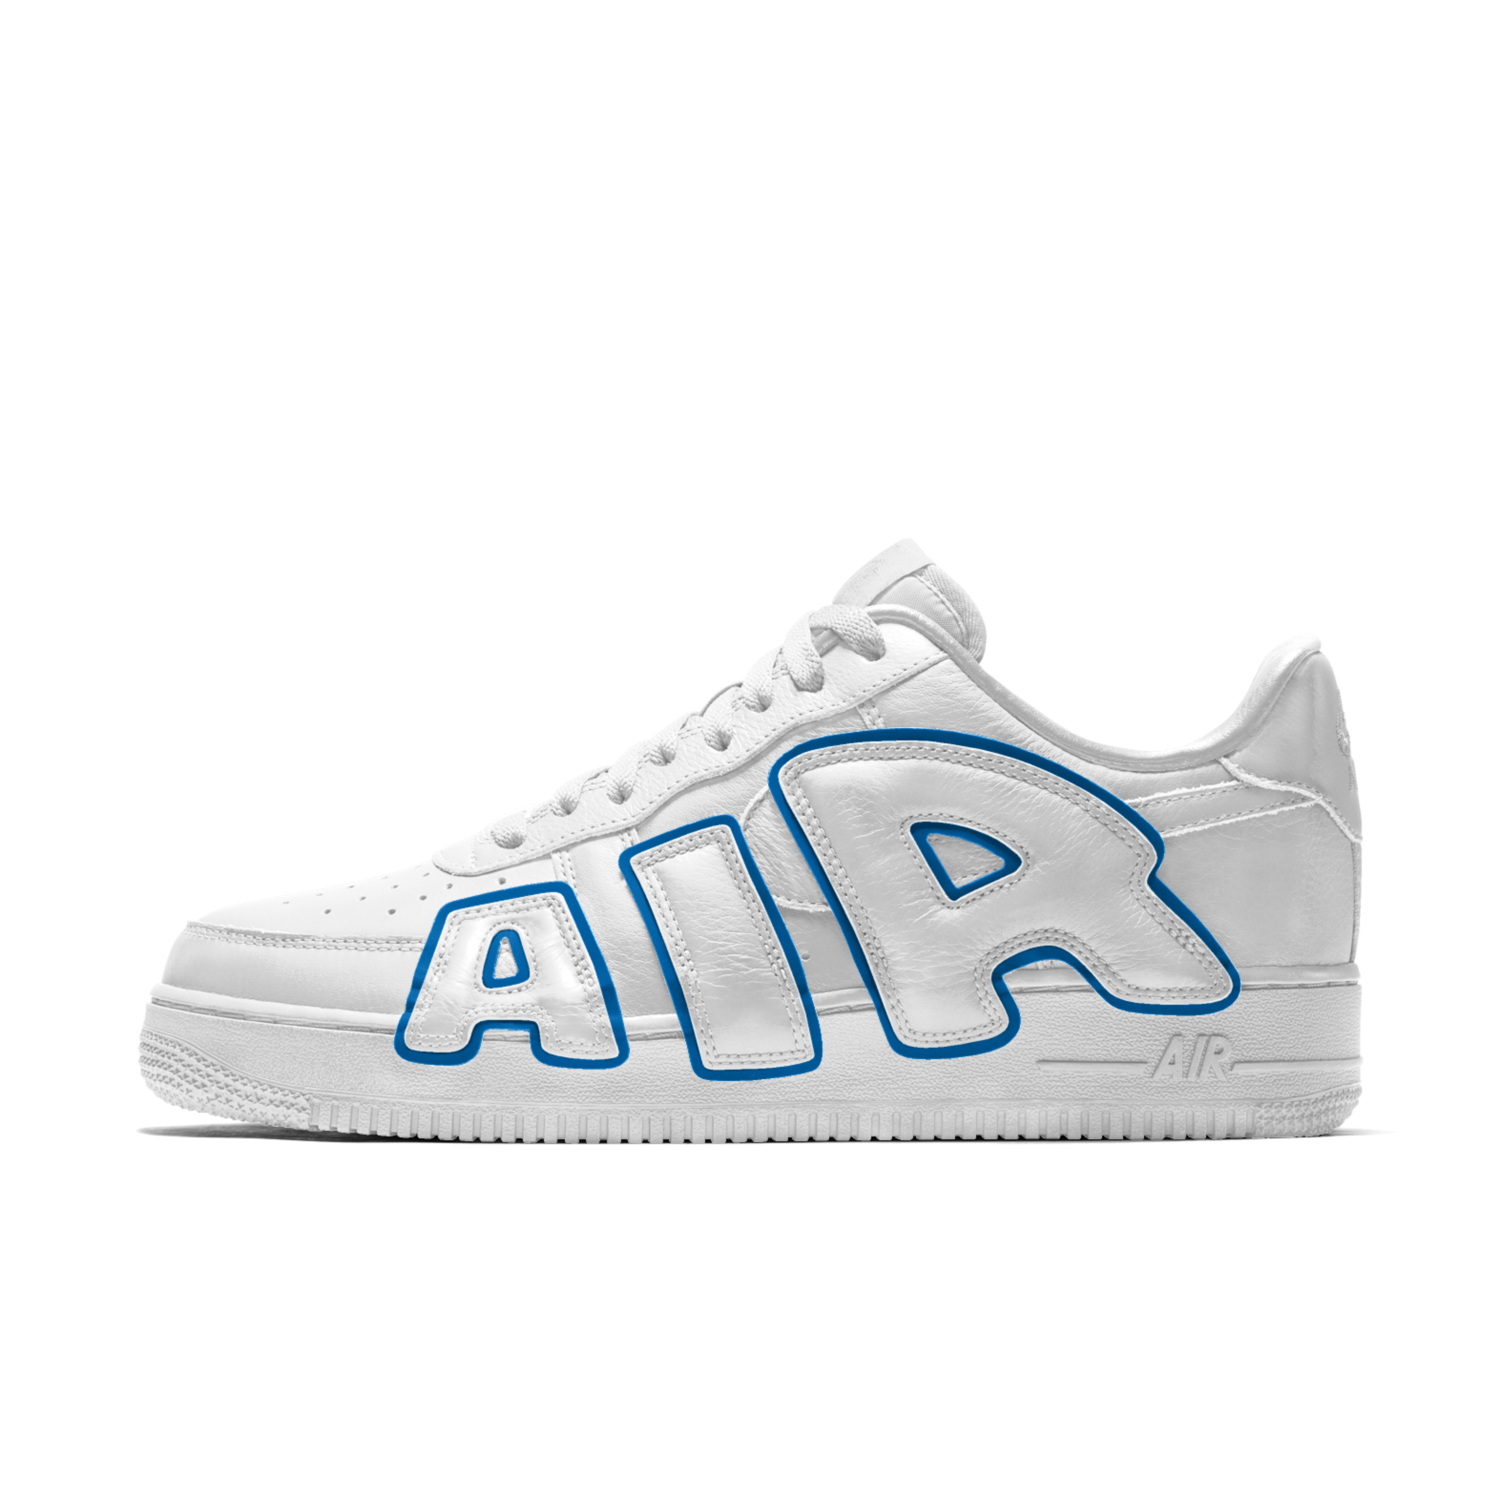 cpfm air force 1 nike by you